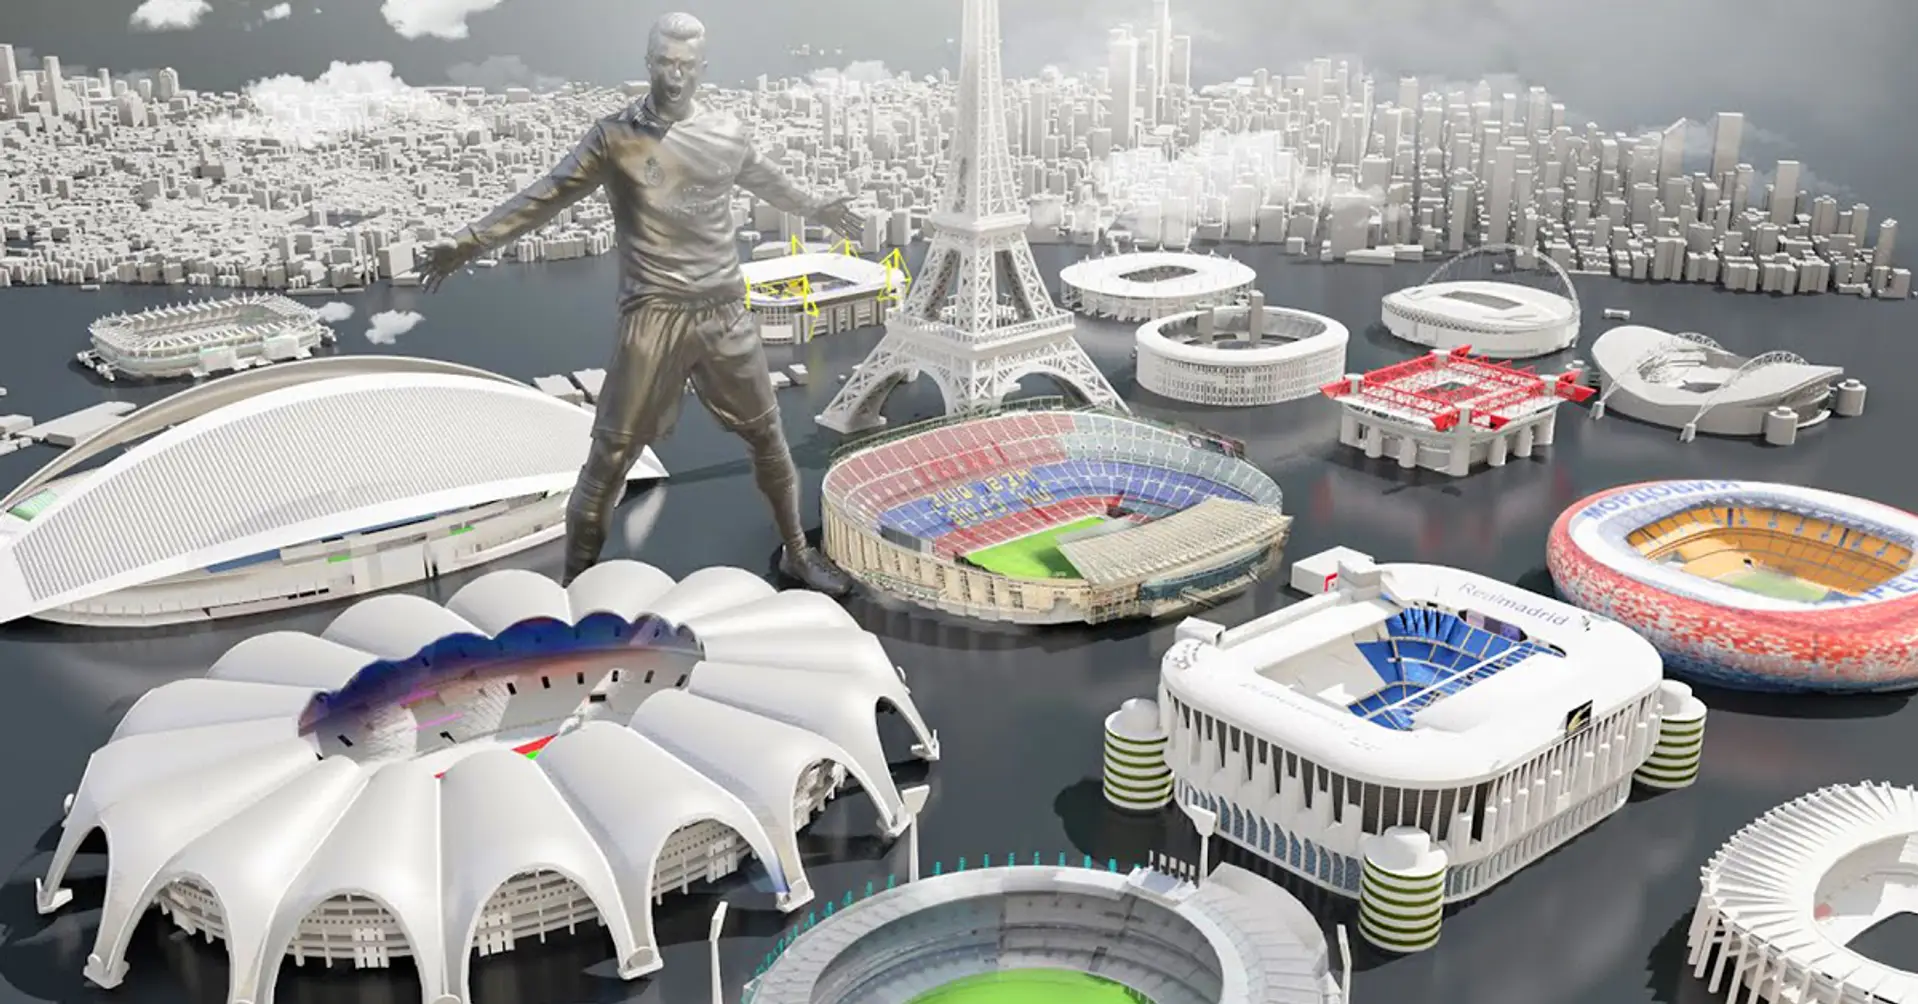 Incredible stadium size comparison shows difference between world-famous arenas